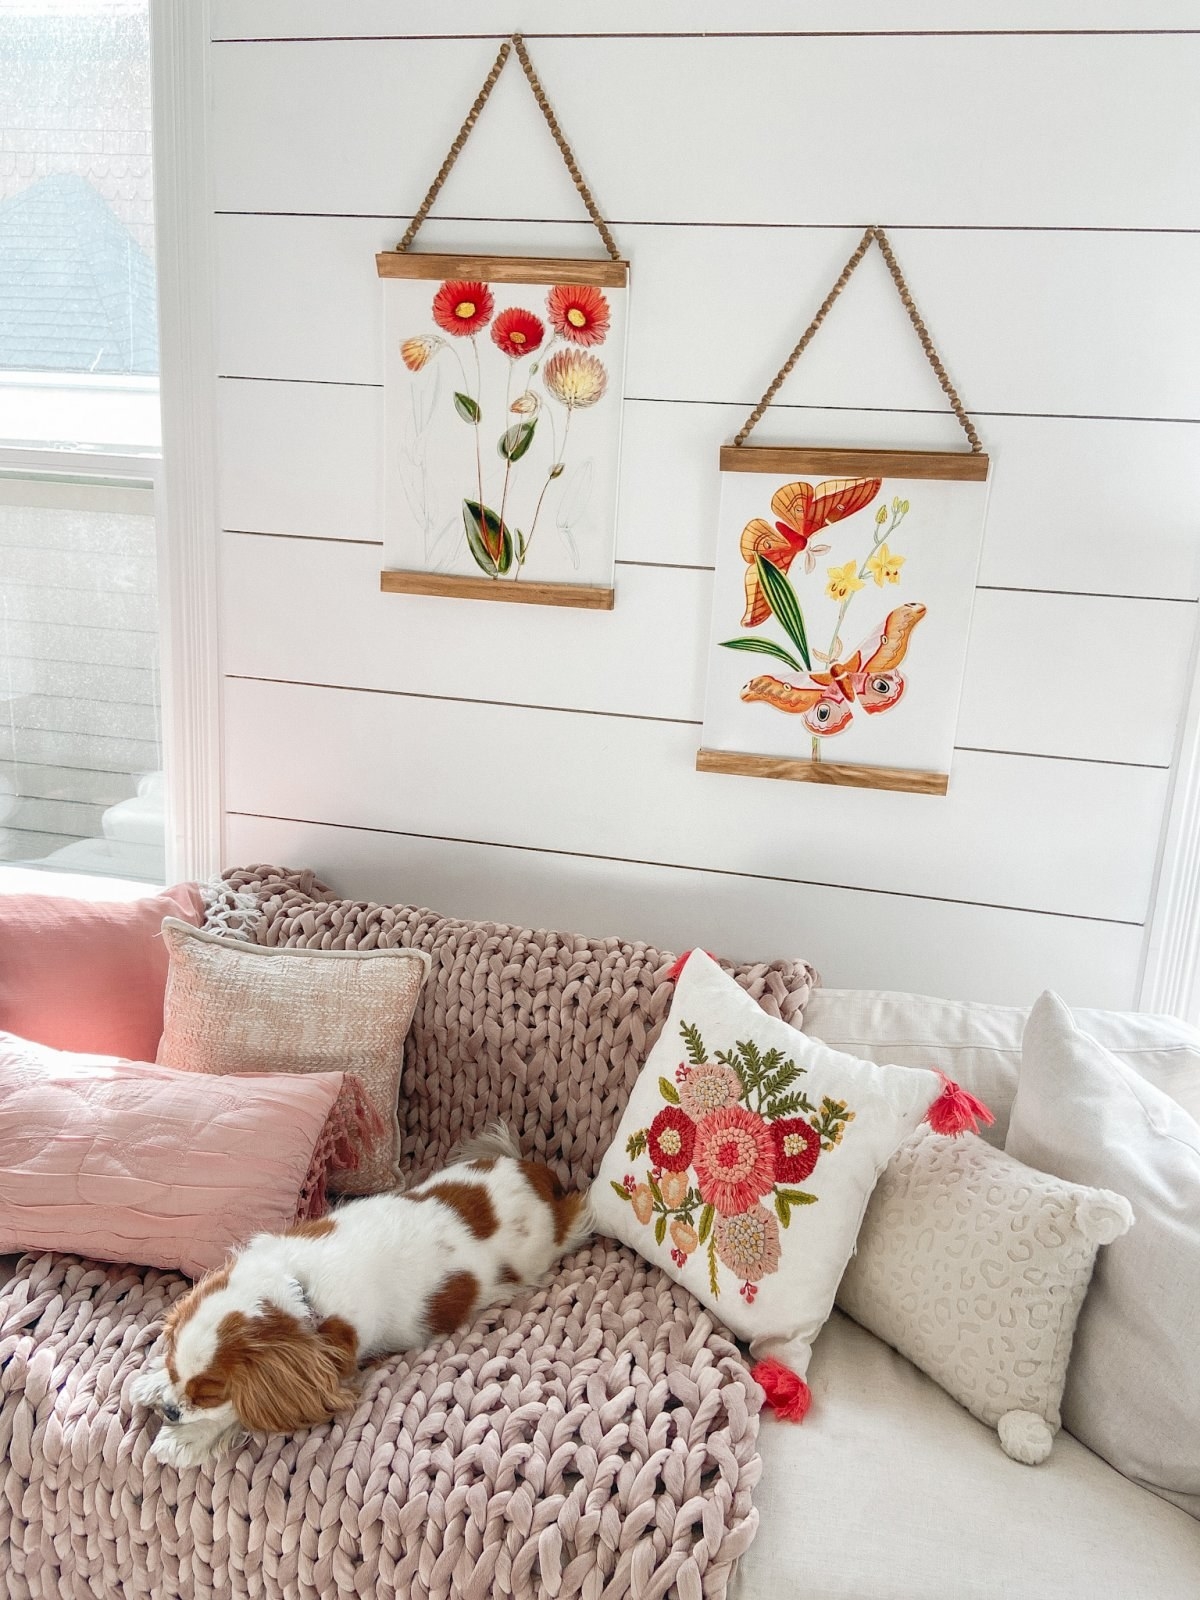 beaded hangers with floral prints on the wall